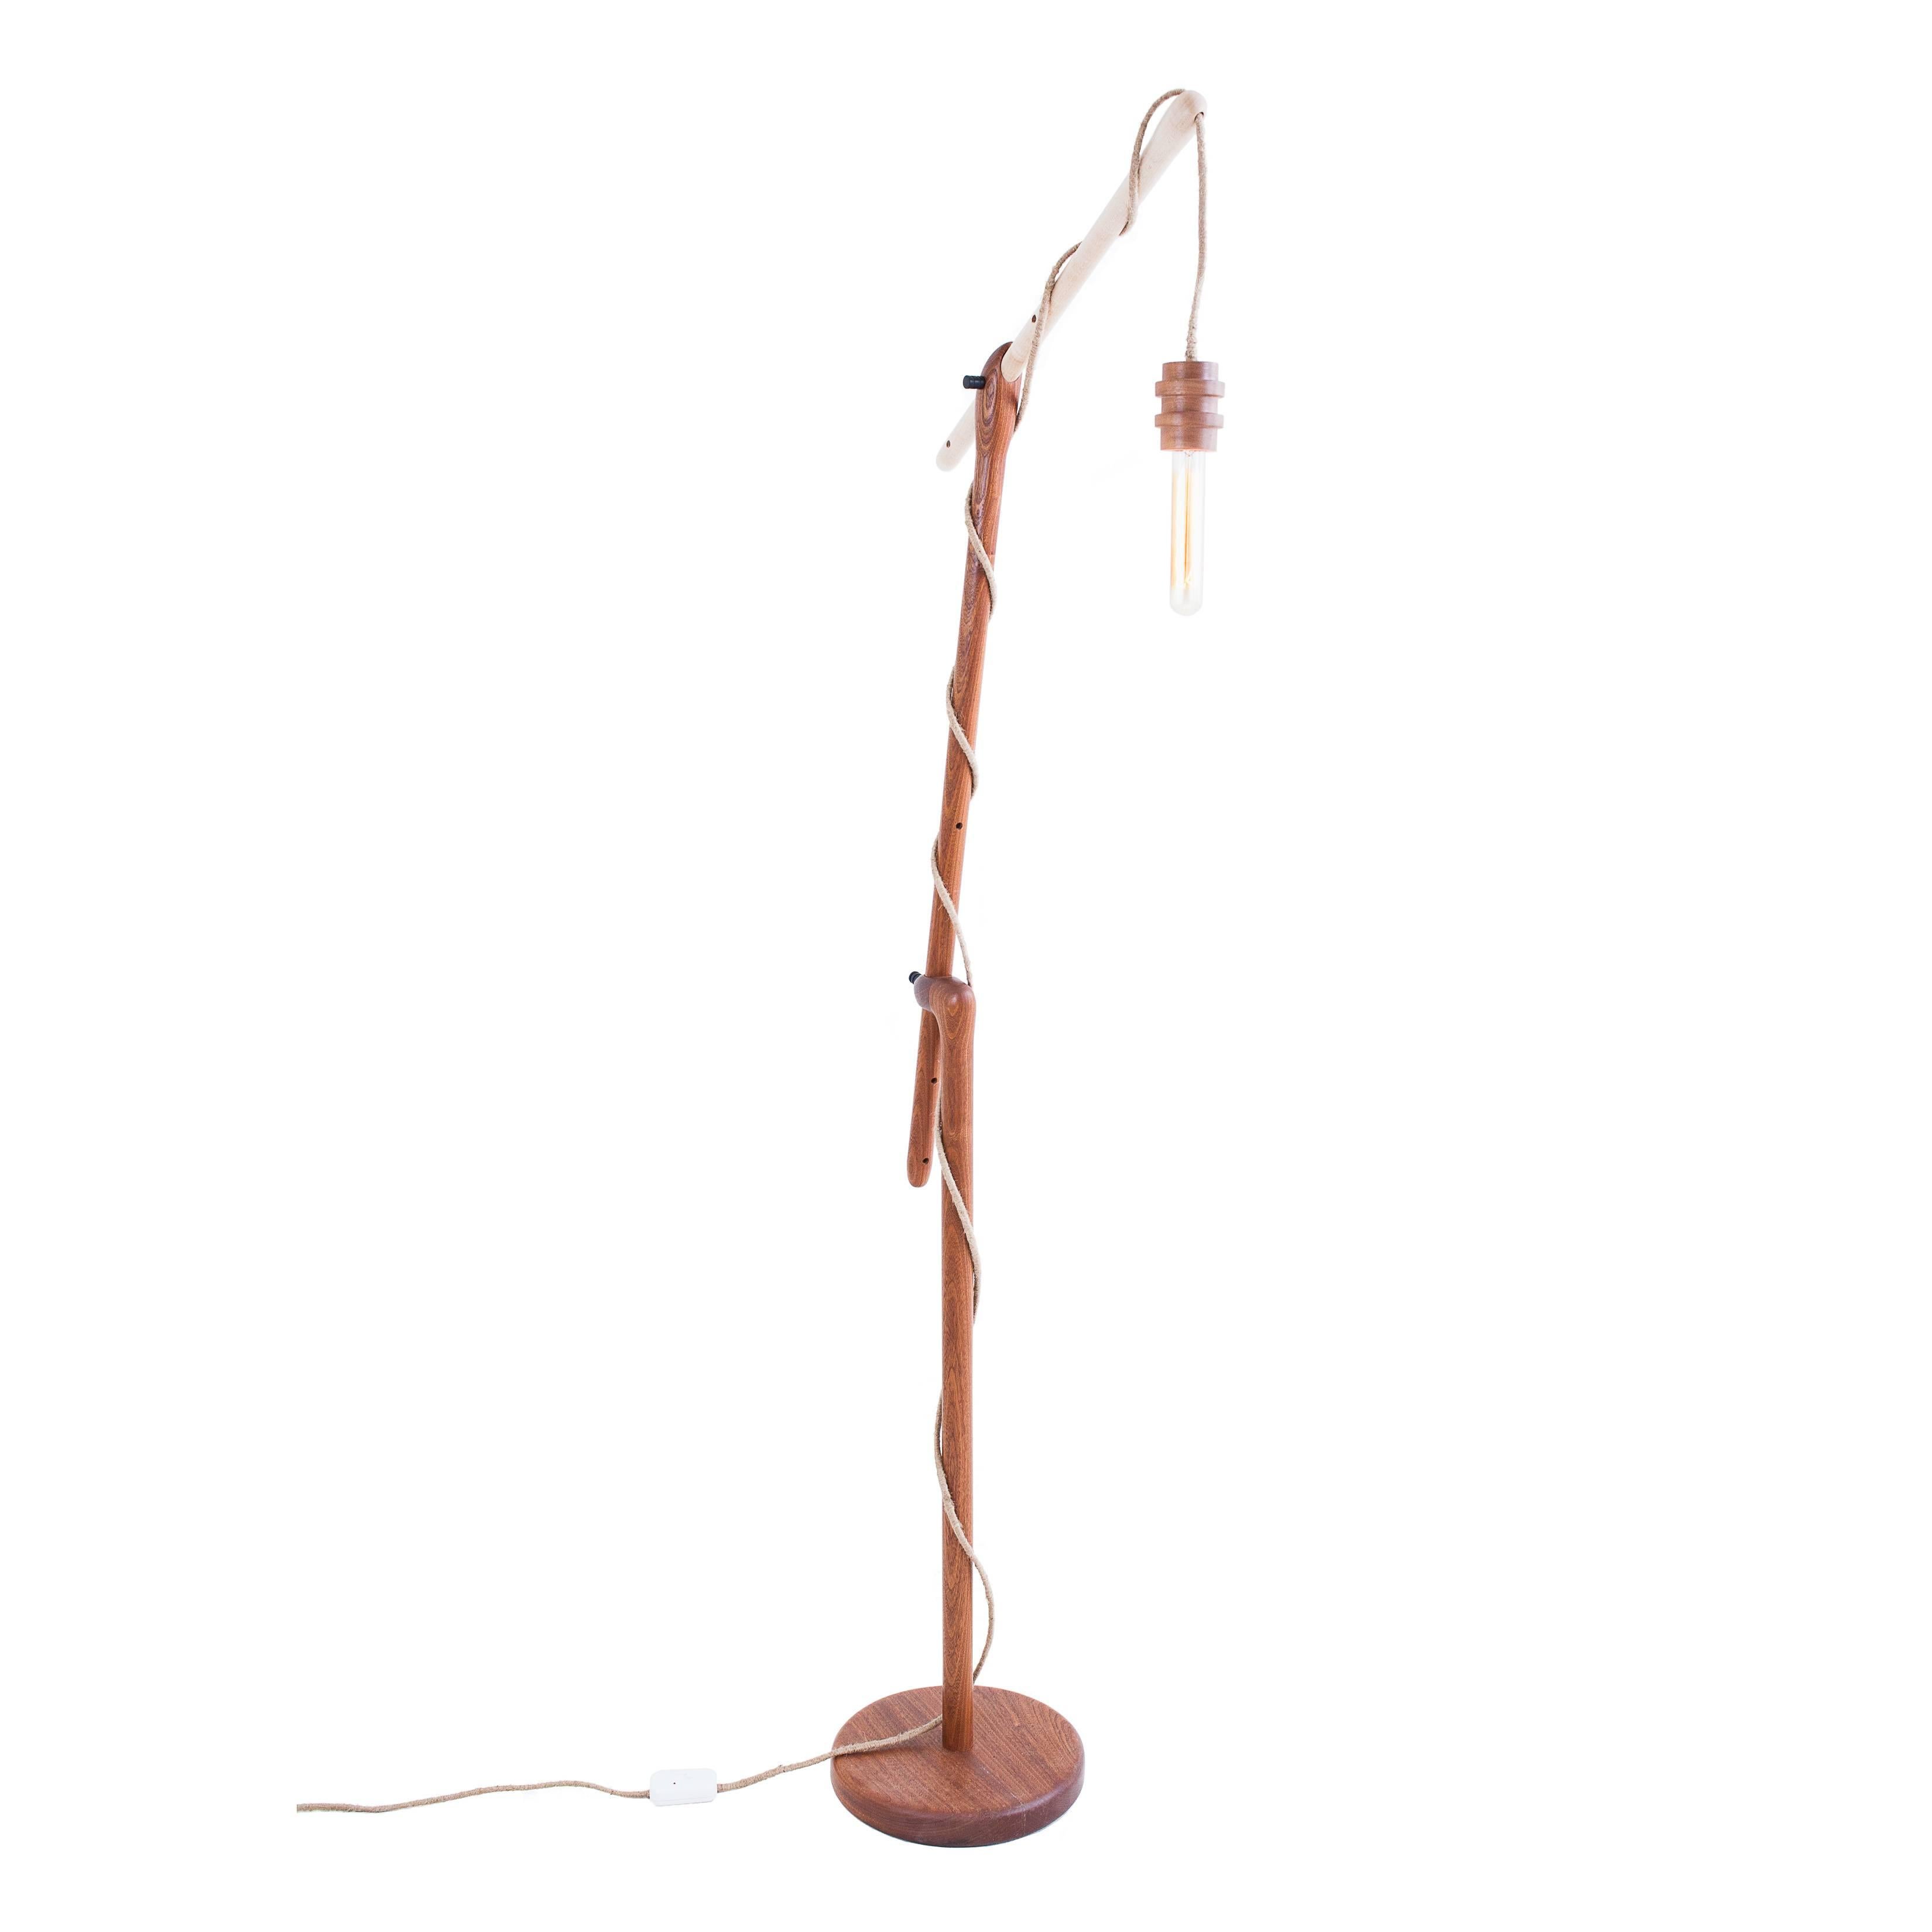 The reading light is an adjustable floor lamp with an all wood system. All elements are hand-turned solid wood. Gabon ebony pins allow the reader to adjust the sapele and maple arms to the desired angle and height. The solid hanging pendant light